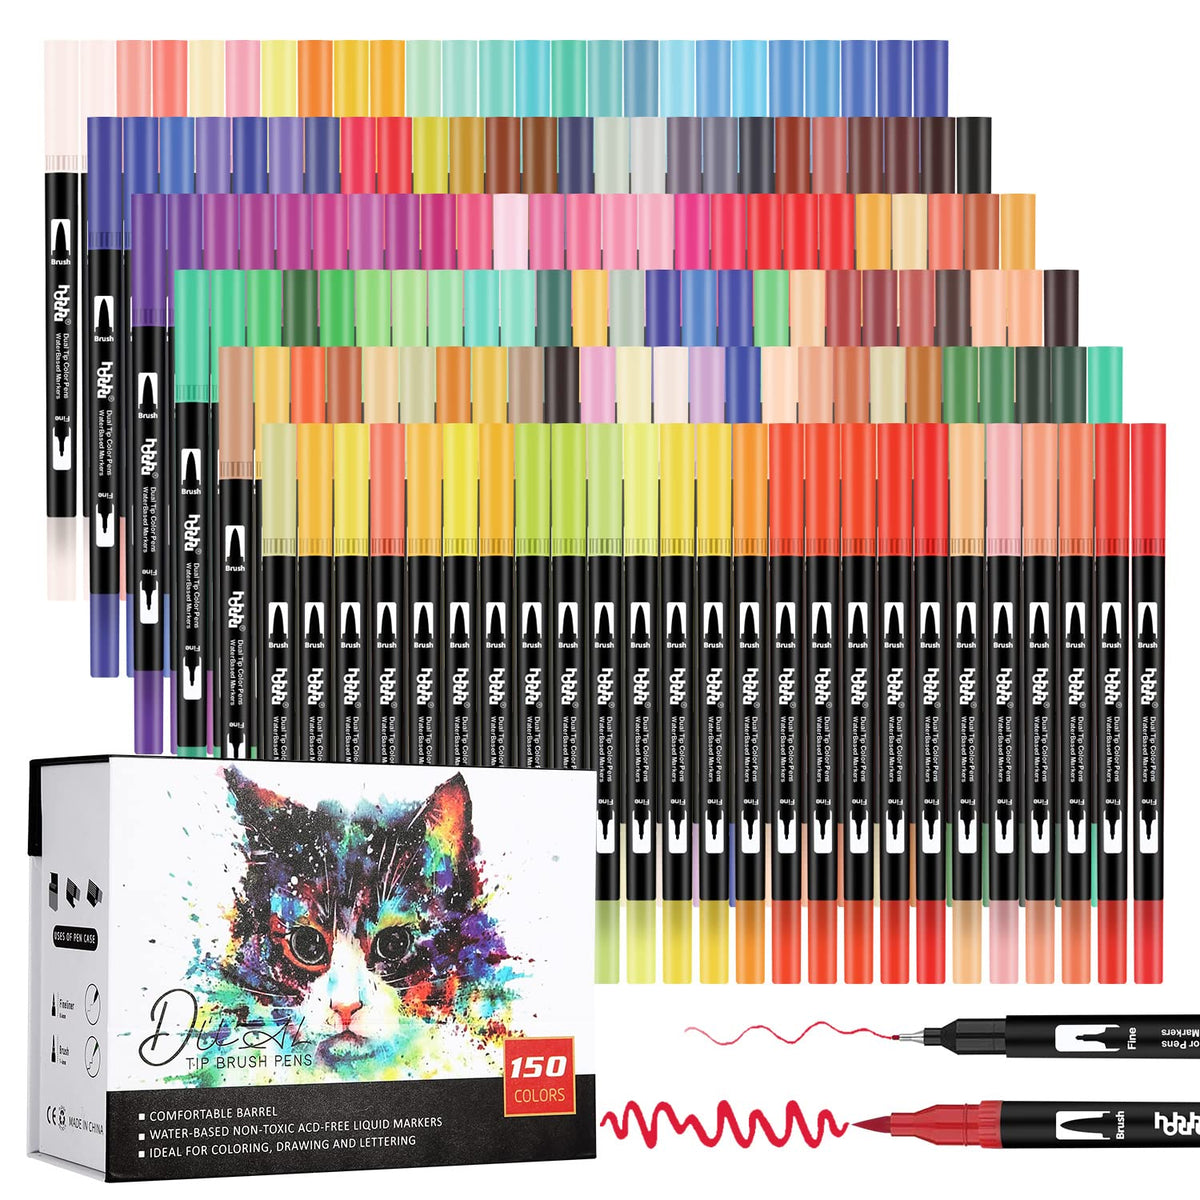 Hethrone 100 Colors Dual Brush Pens Colored Markers with 0.4mm Fine-Liner Tip